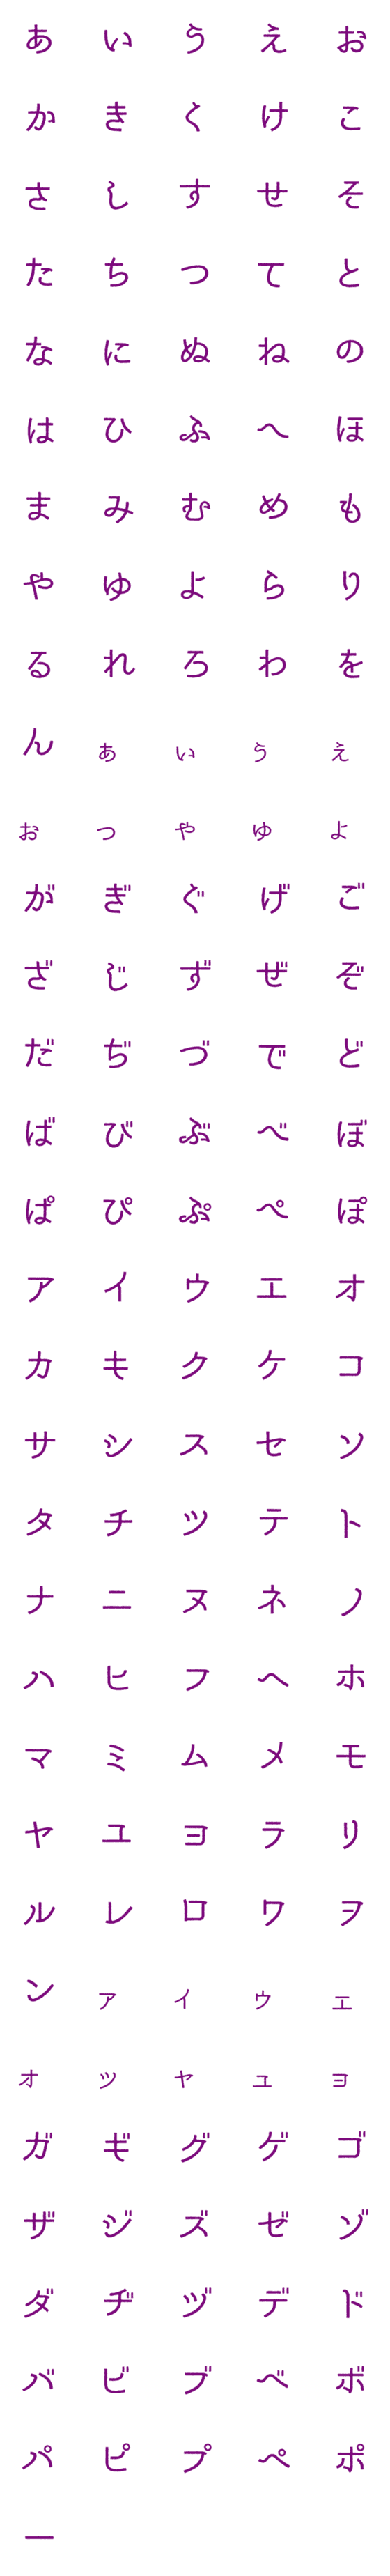 [LINE絵文字]まほう字 デコ文字の画像一覧